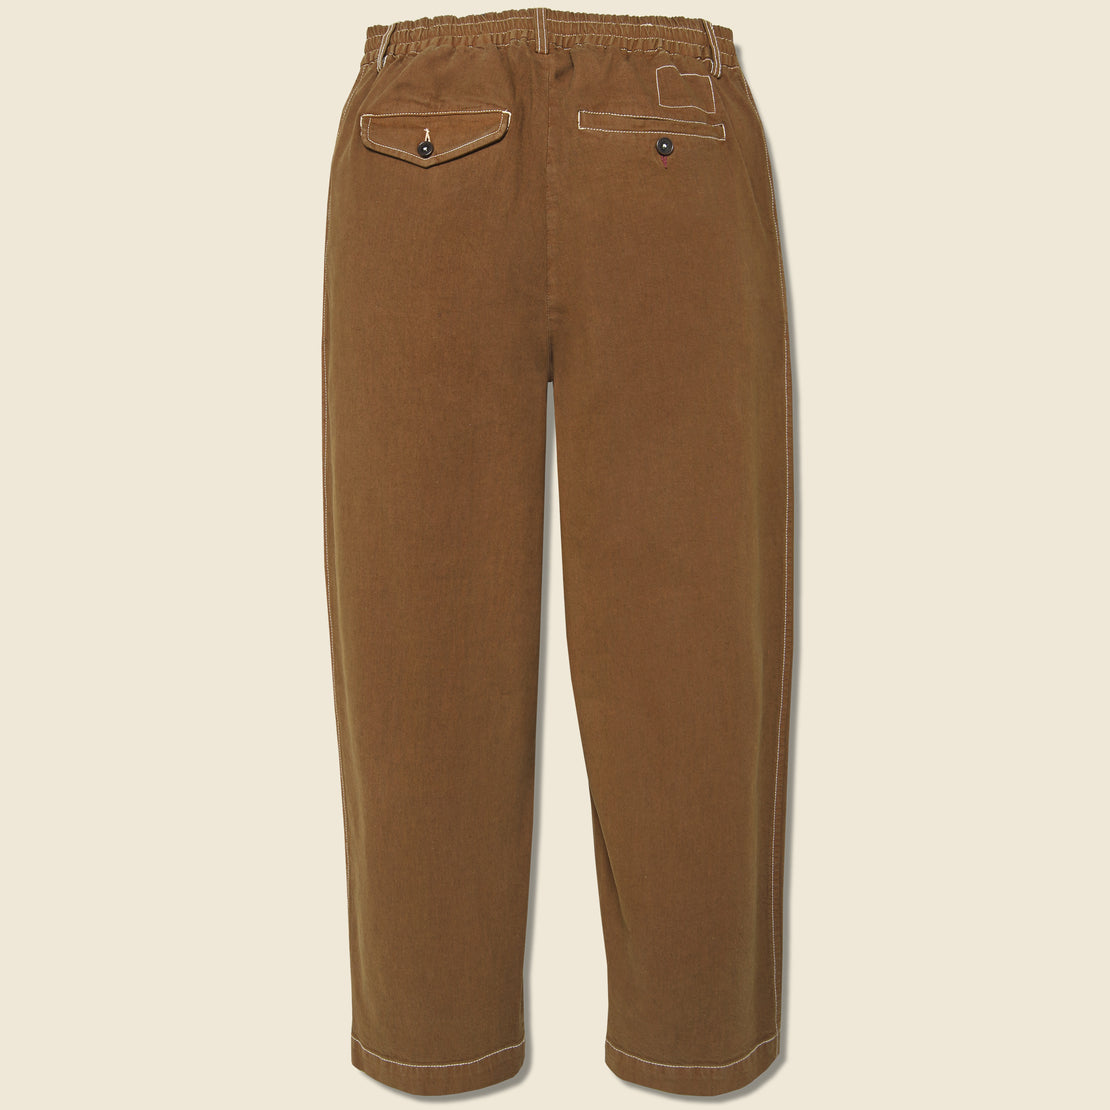 Pleated Twill Track Pant - Brown - Universal Works - STAG Provisions - Pants - Twill